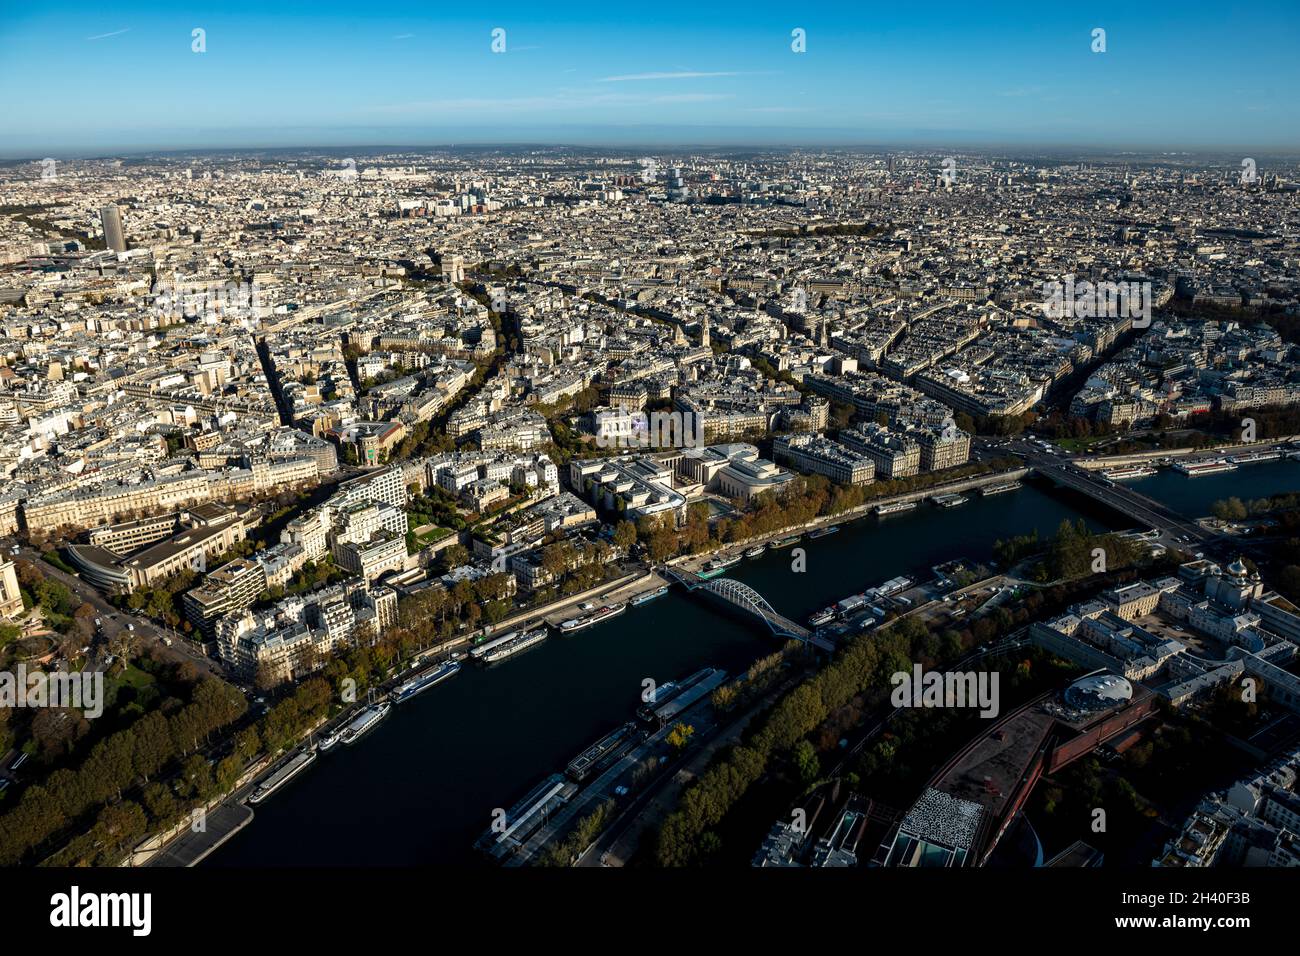 Aerial view looking down at colorful rooftops of buildings and streets over Paris, France Stock Photo